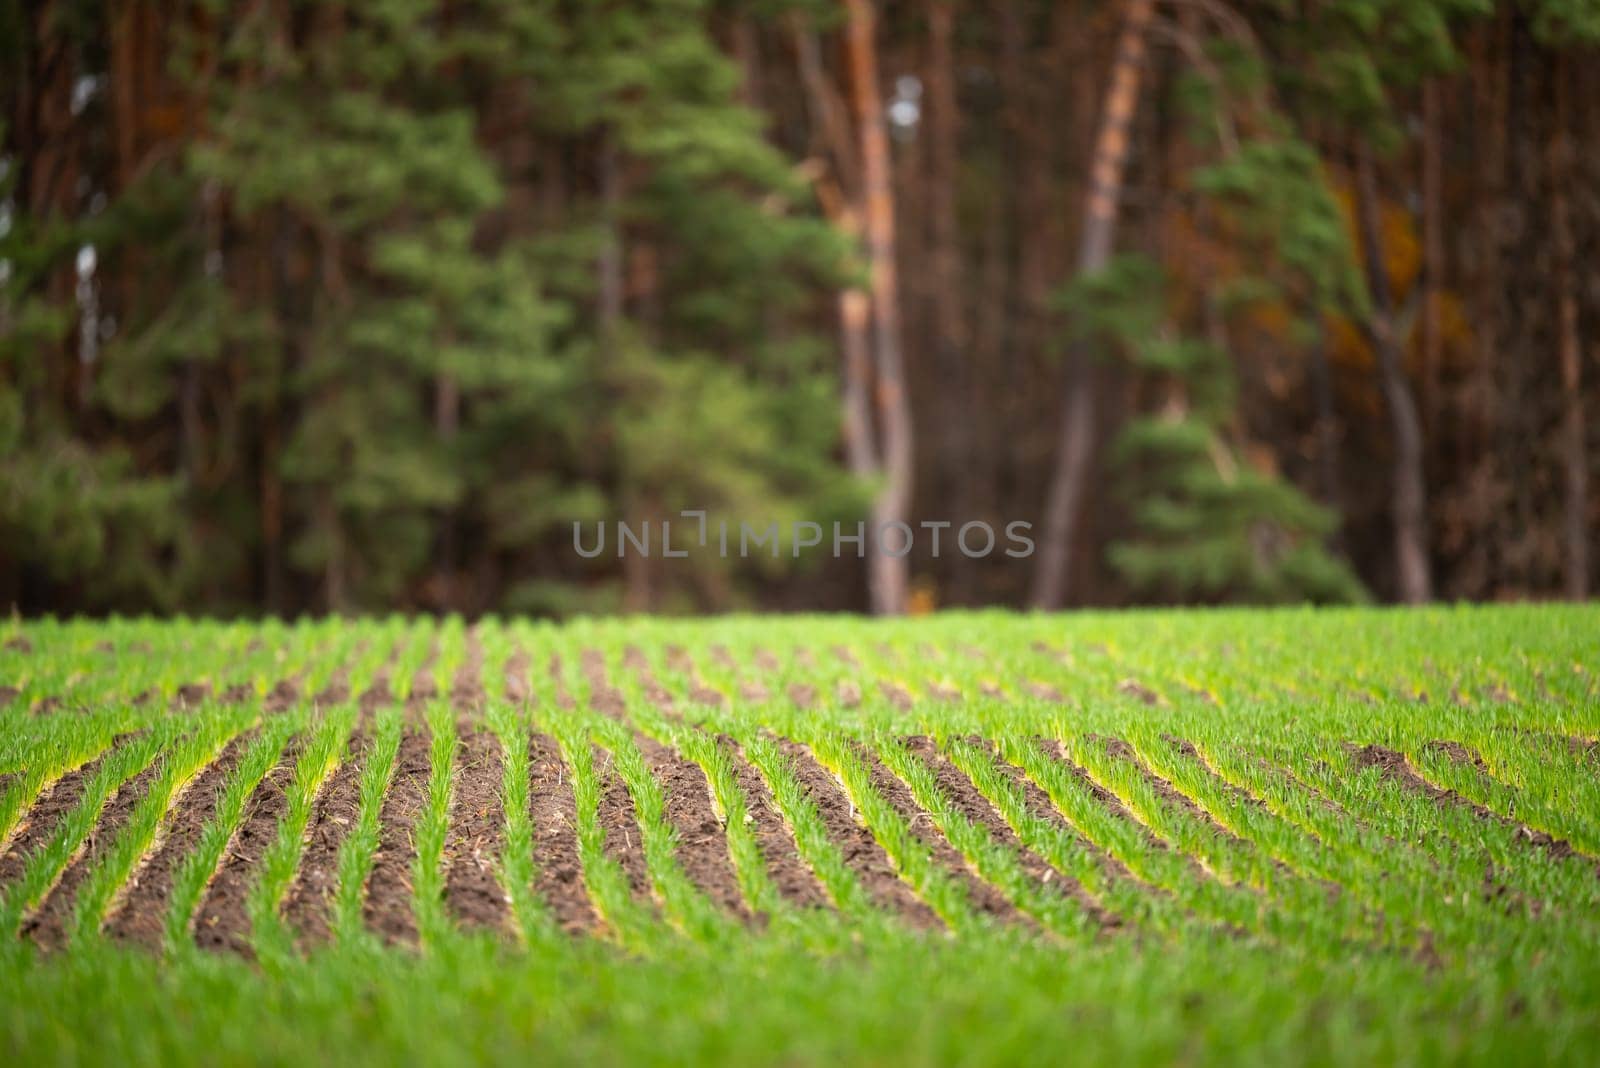 Winter crops for harvest next year in autumn by VitaliiPetrushenko